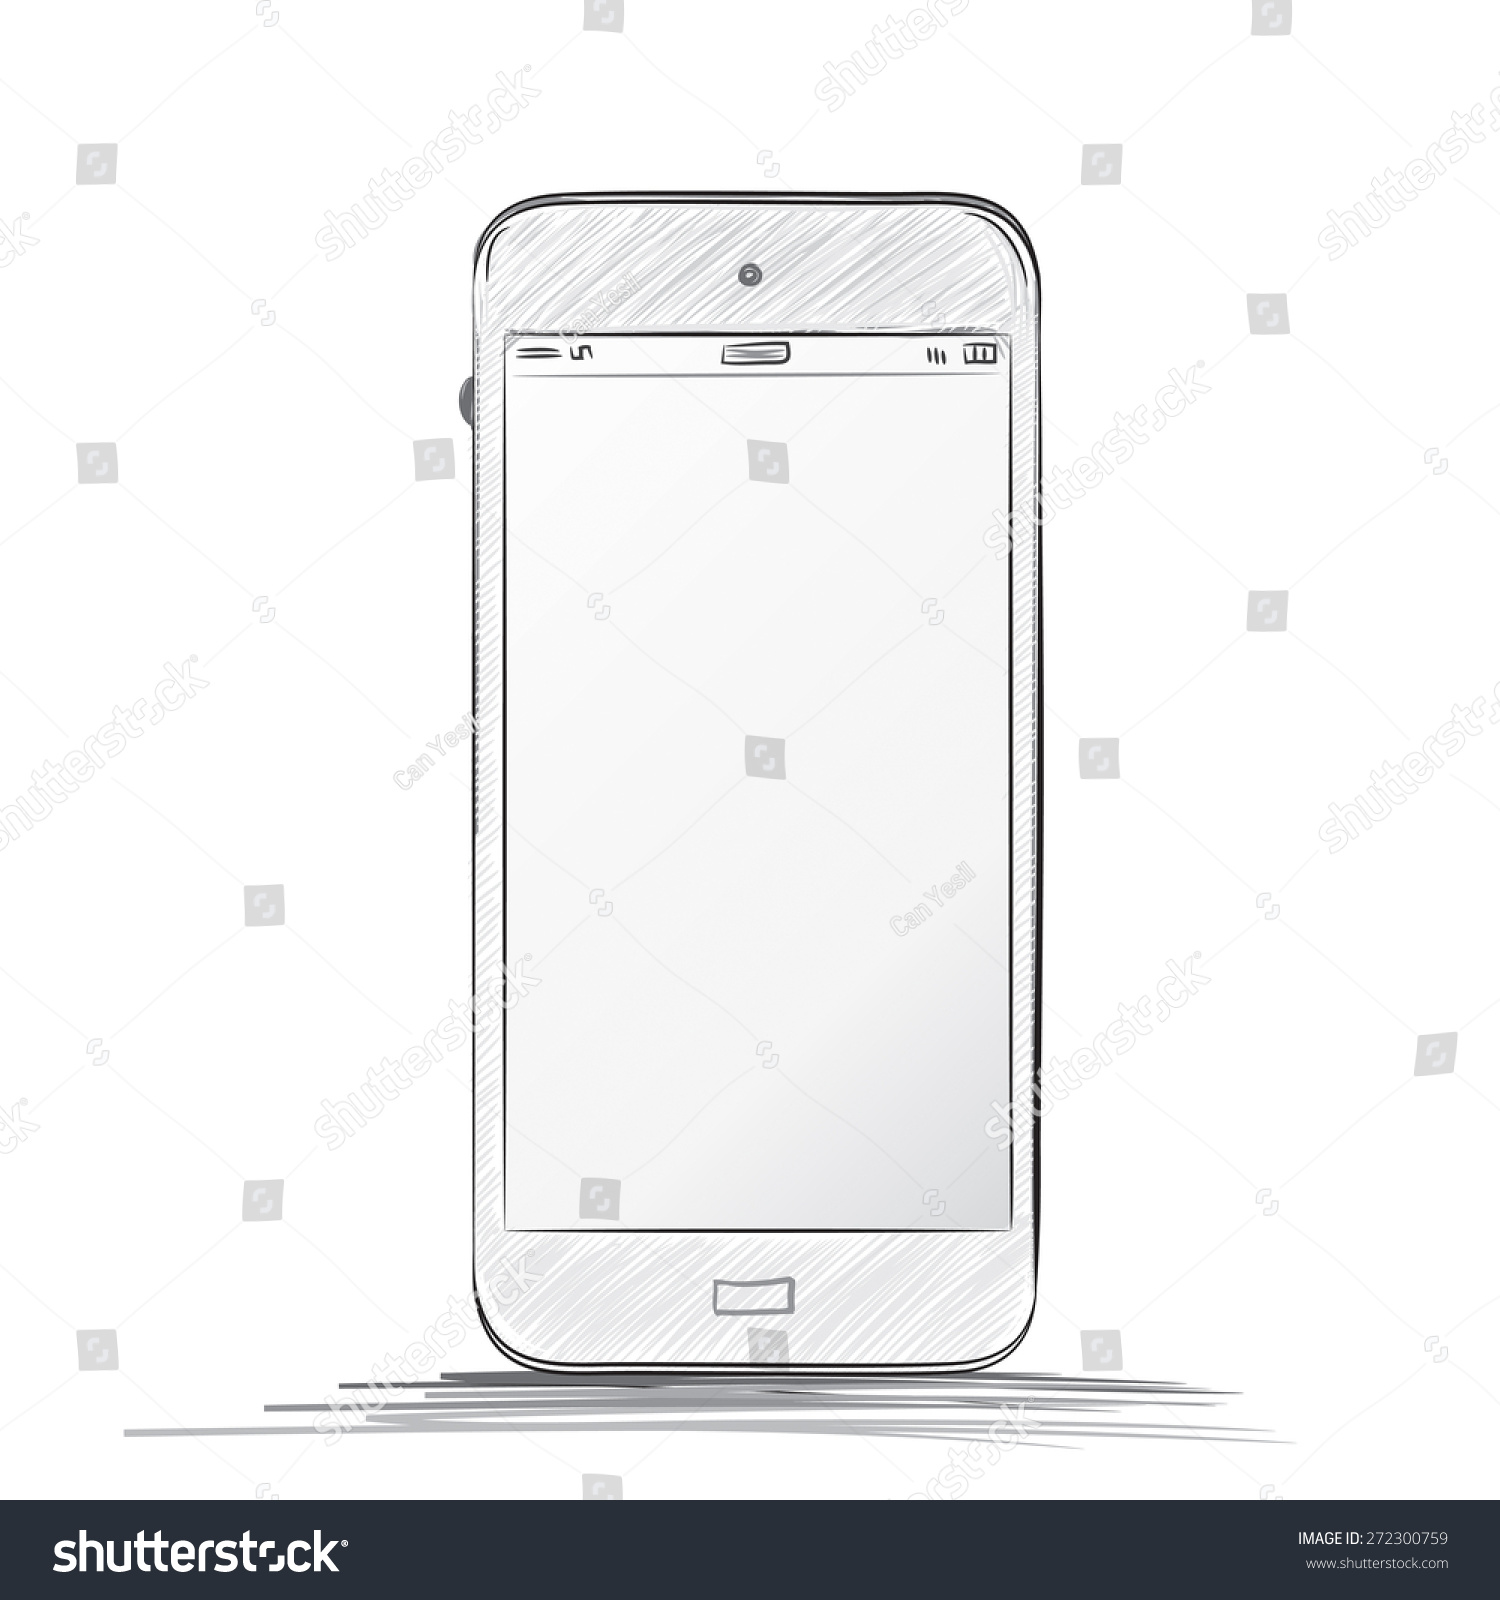 Hand Drawn Mobile Phone Vector Illustration Stock Vector (Royalty Free